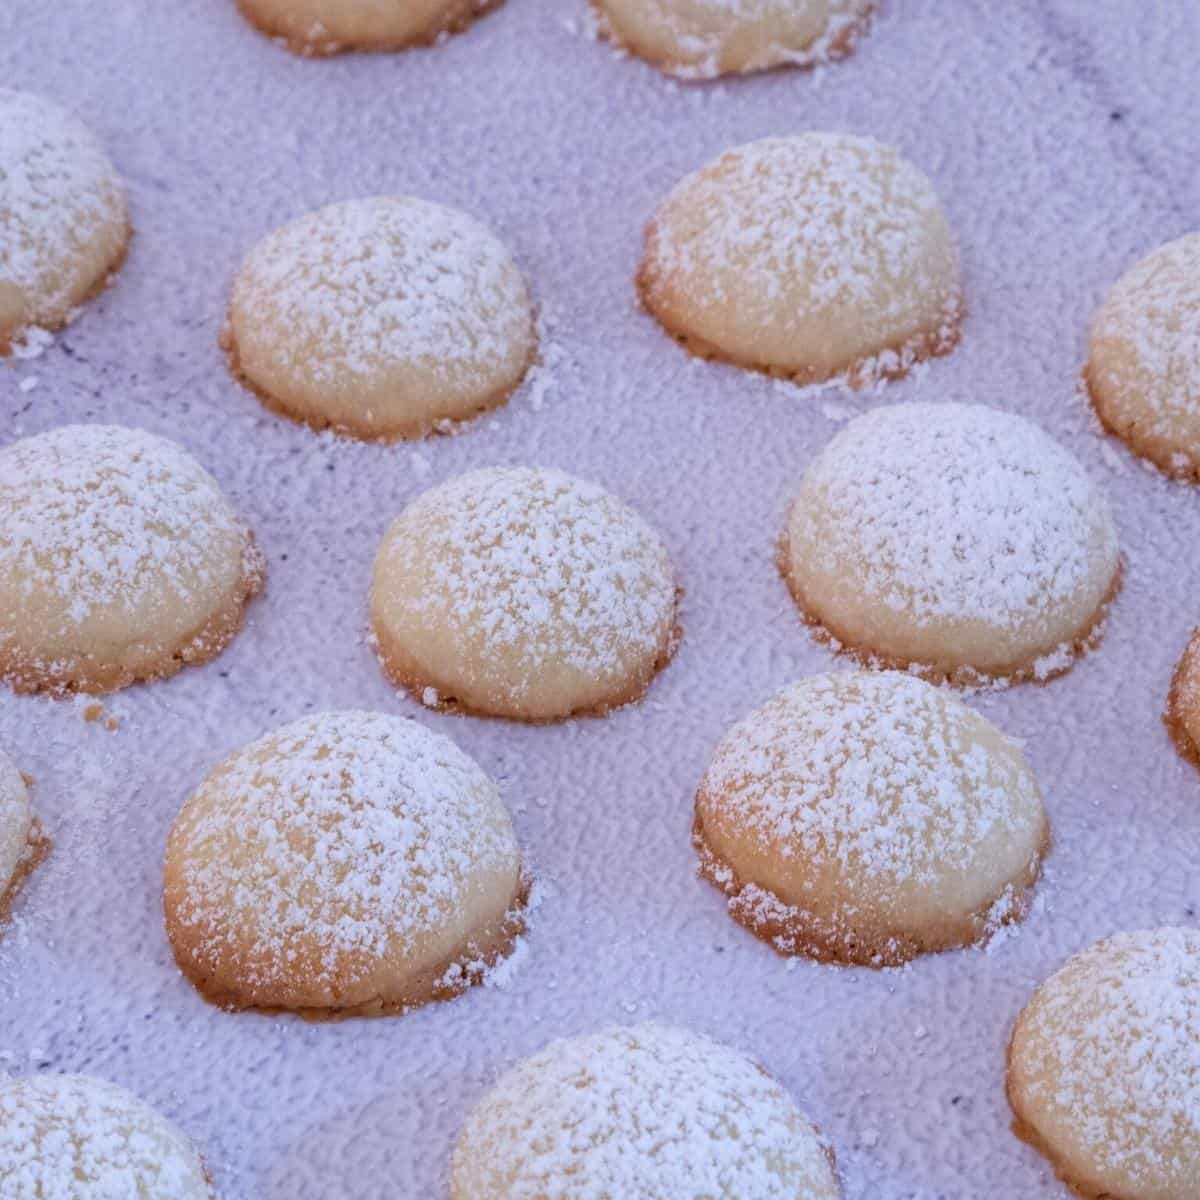 Cookies on a table dusted with powdered sugar.